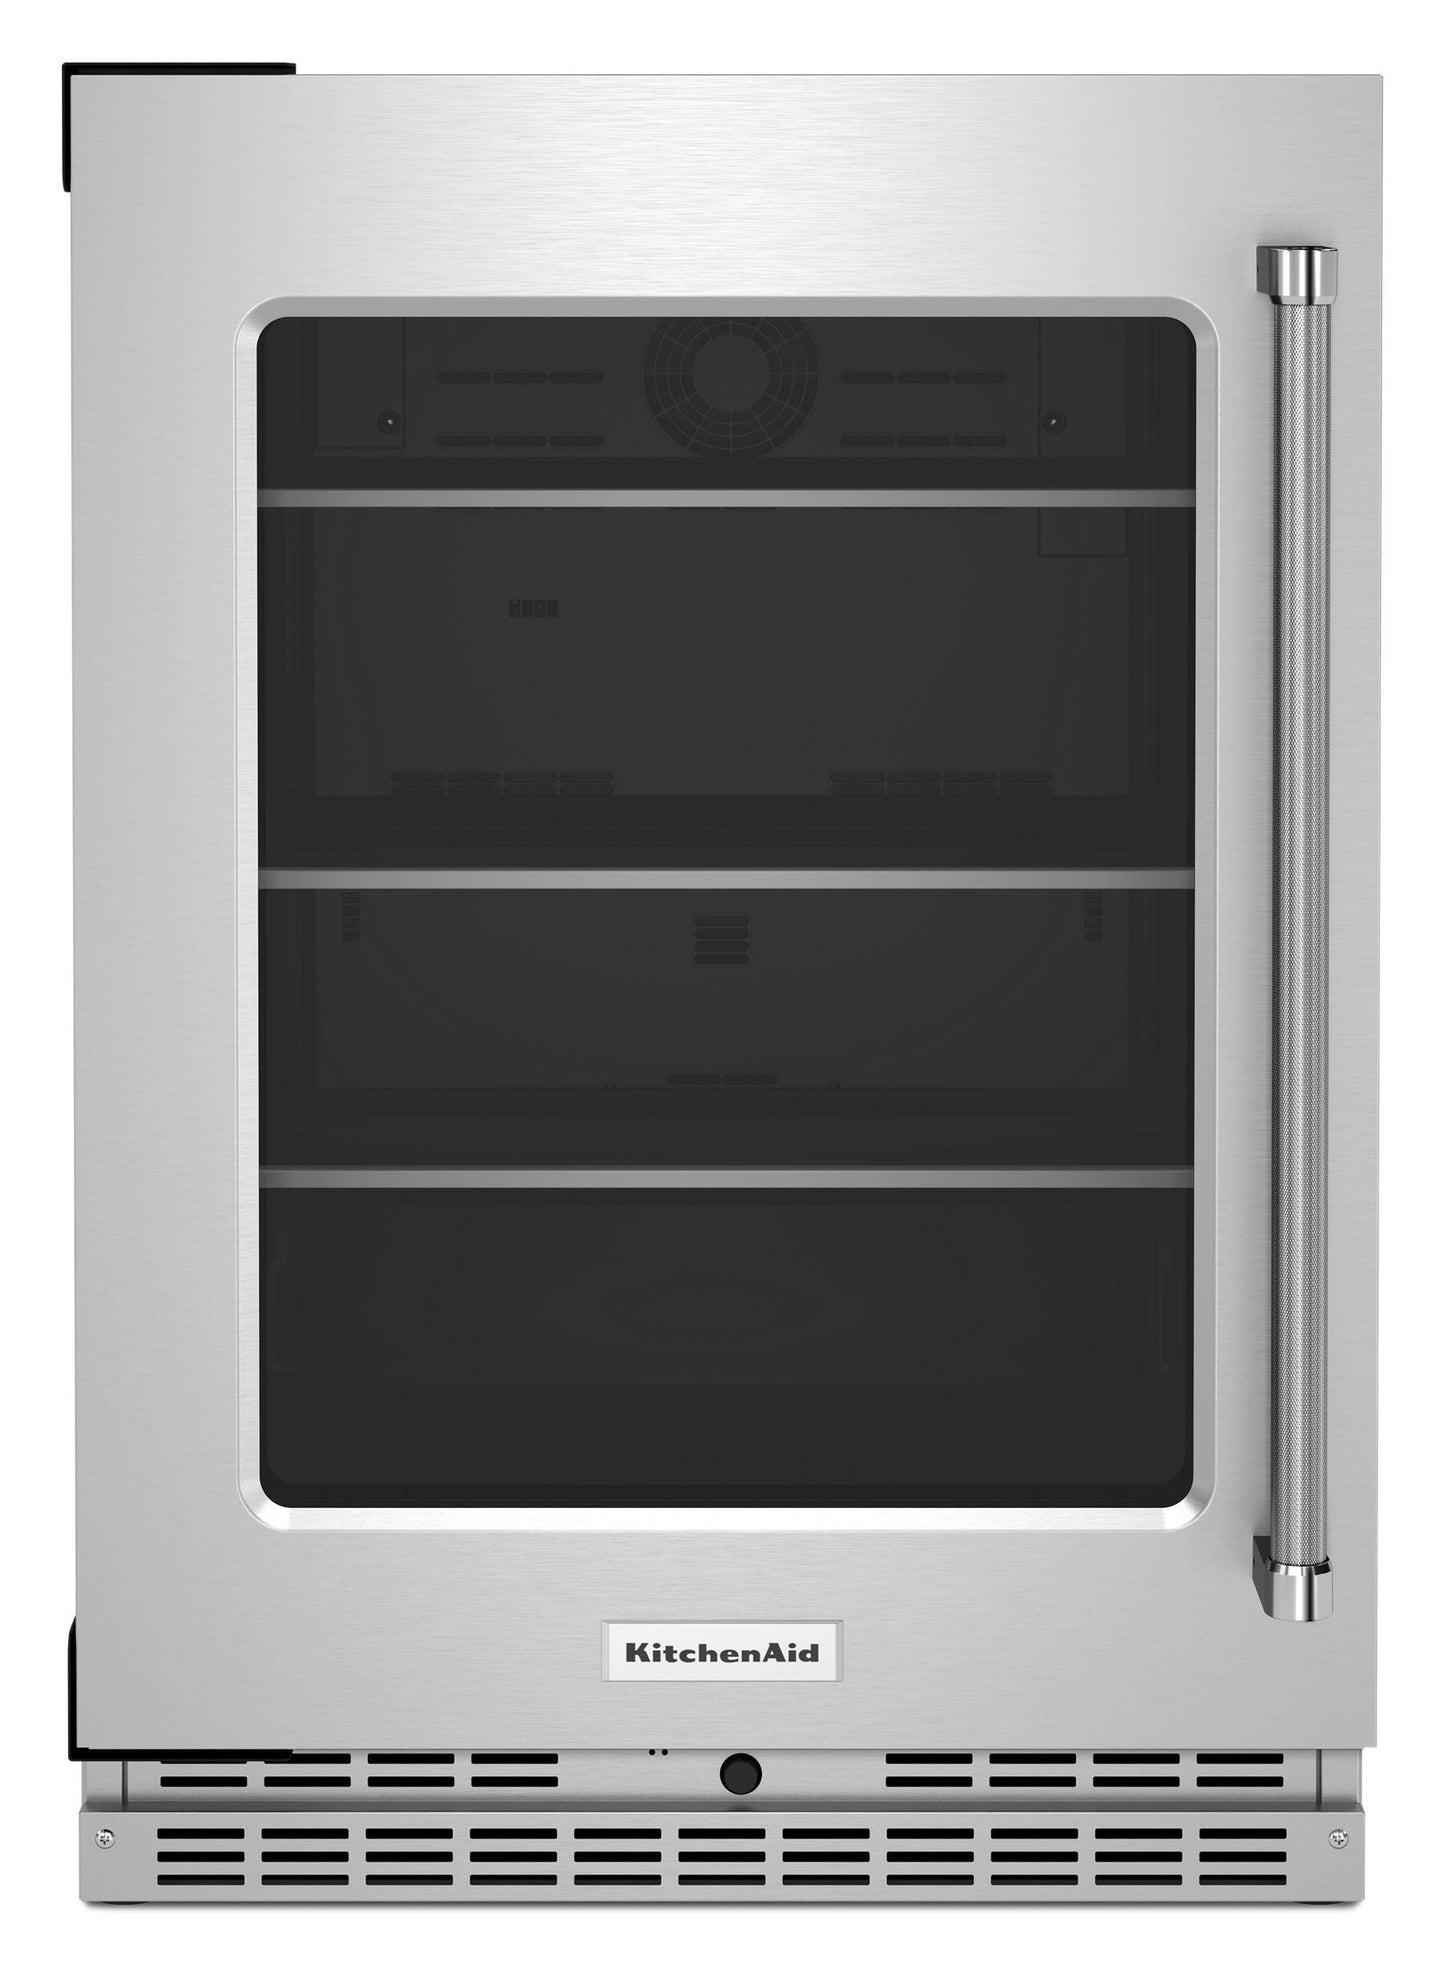 Kitchenaid KURL314KSS 24" Undercounter Refrigerator With Glass Door And Shelves With Metallic Accents - Stainless Steel